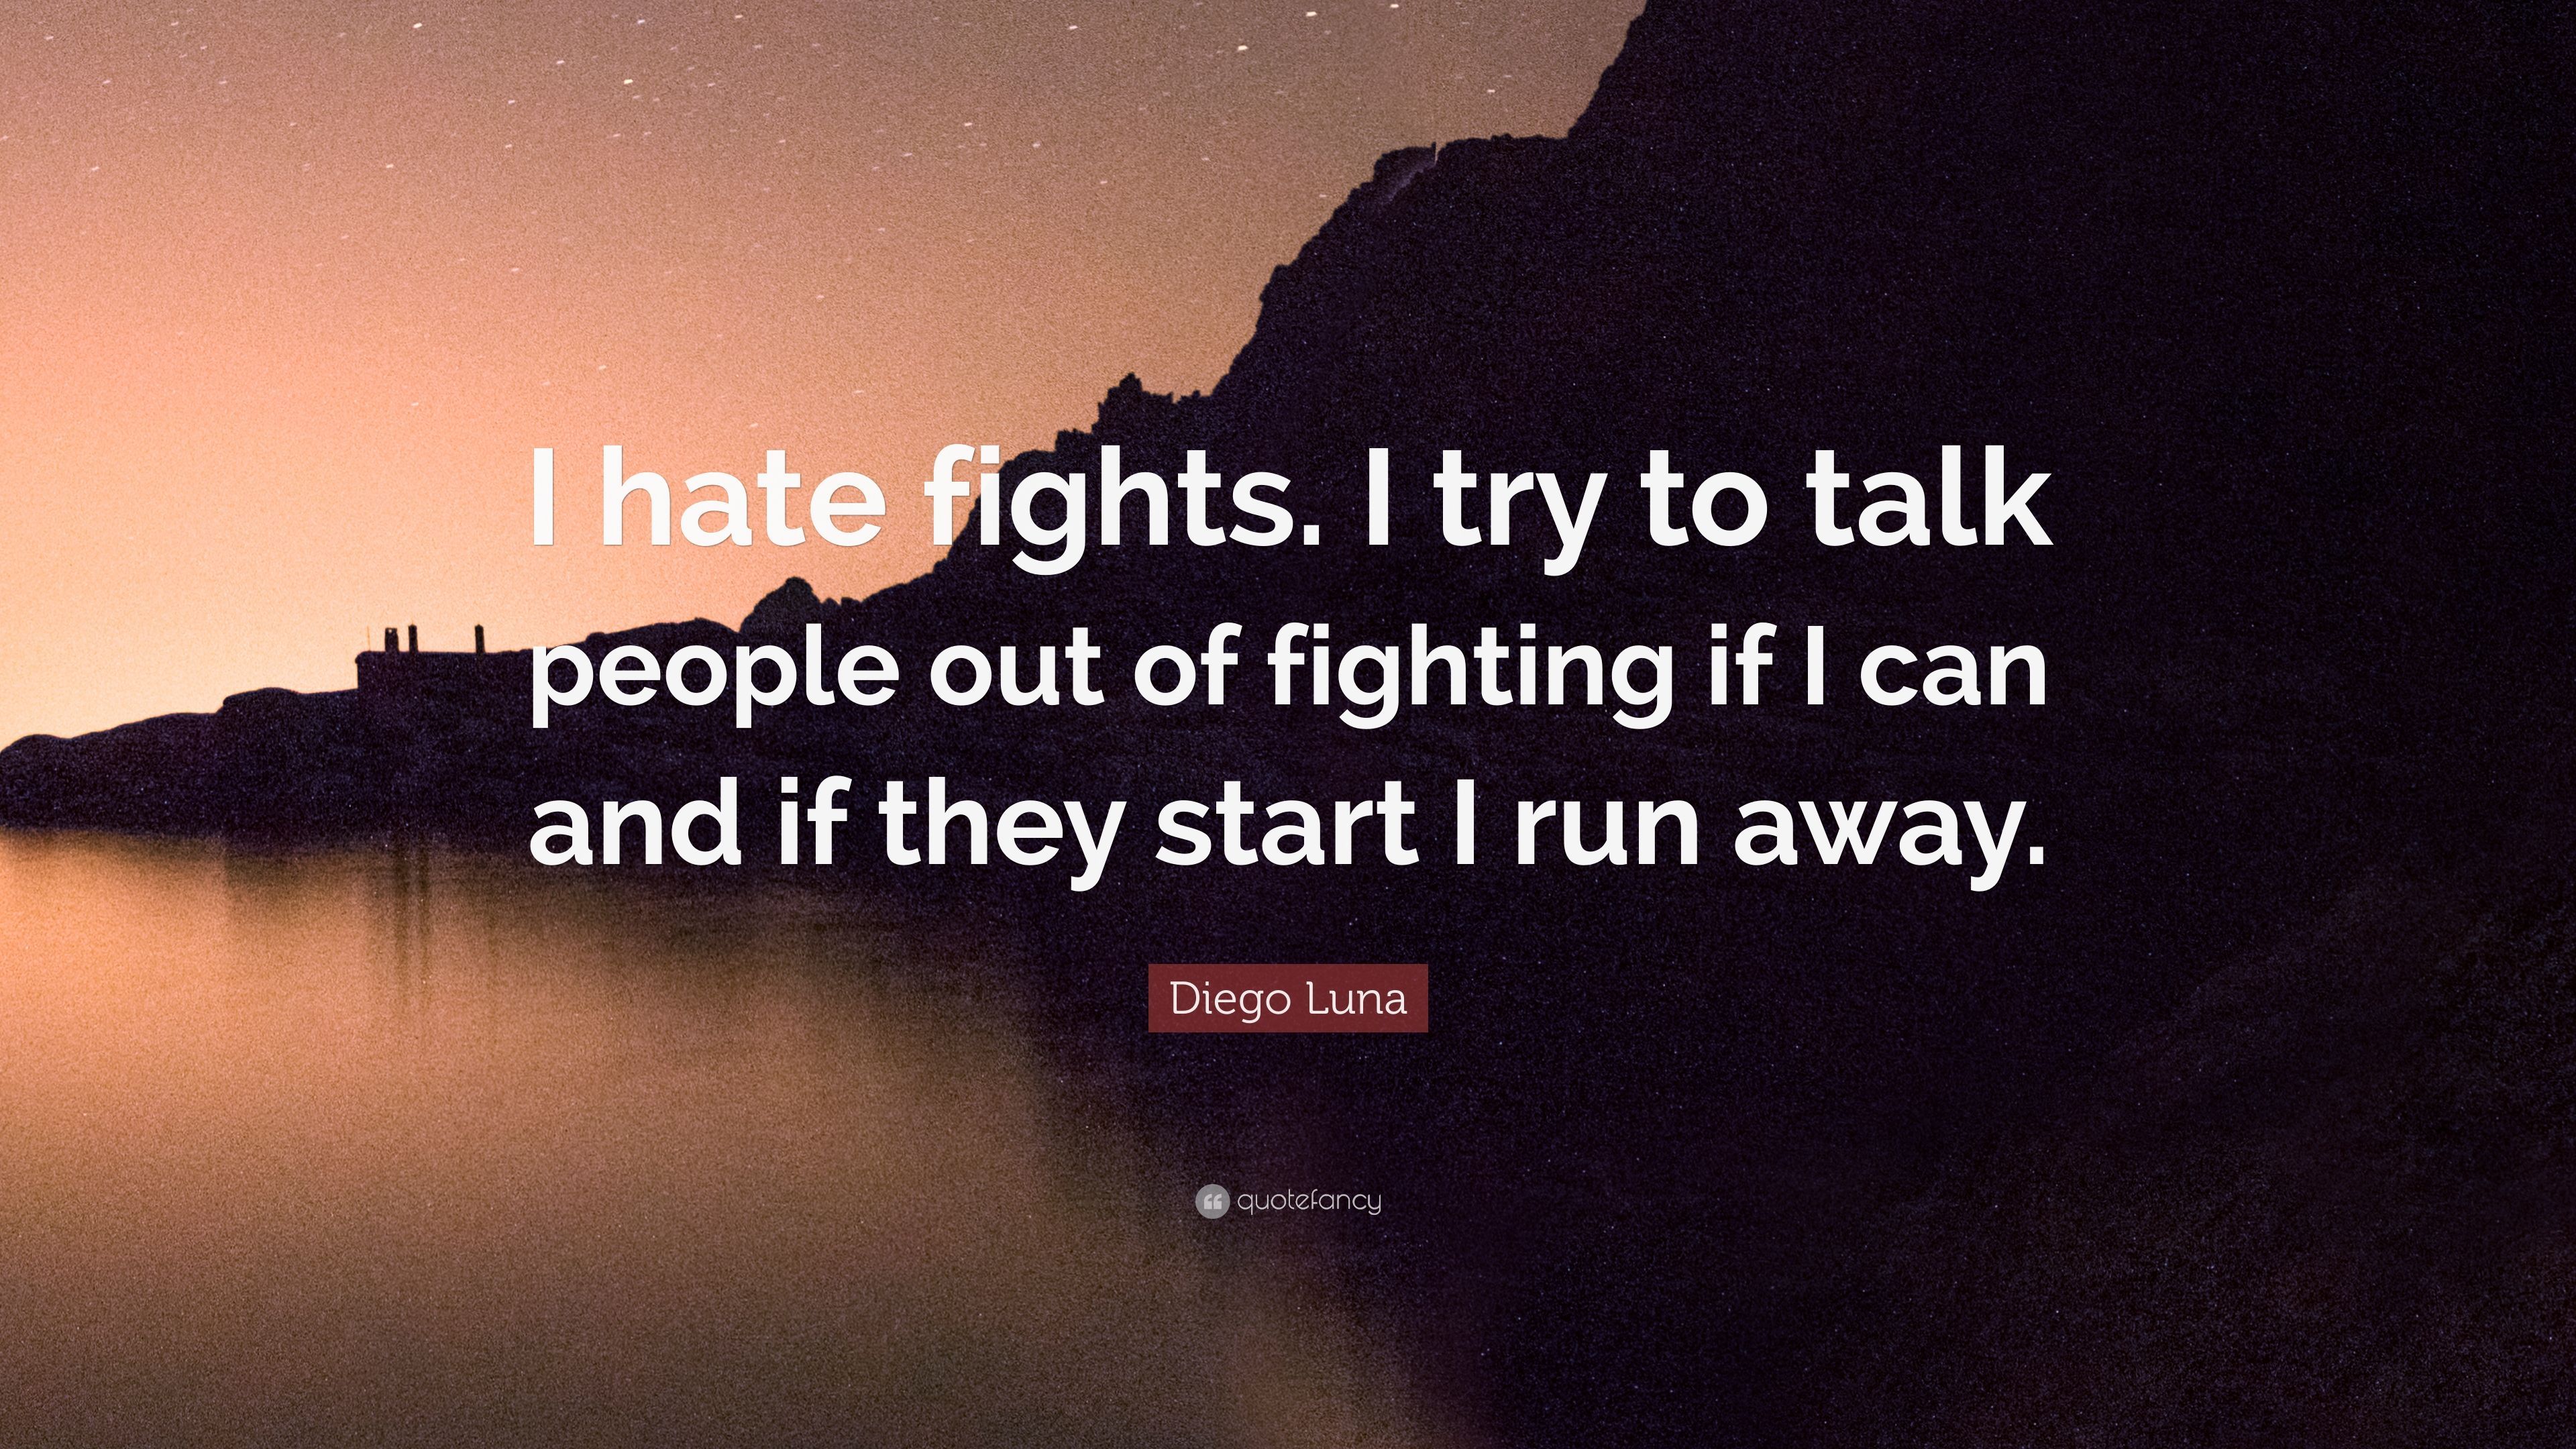 Diego Luna Quote: “I hate fights. I try to talk people out